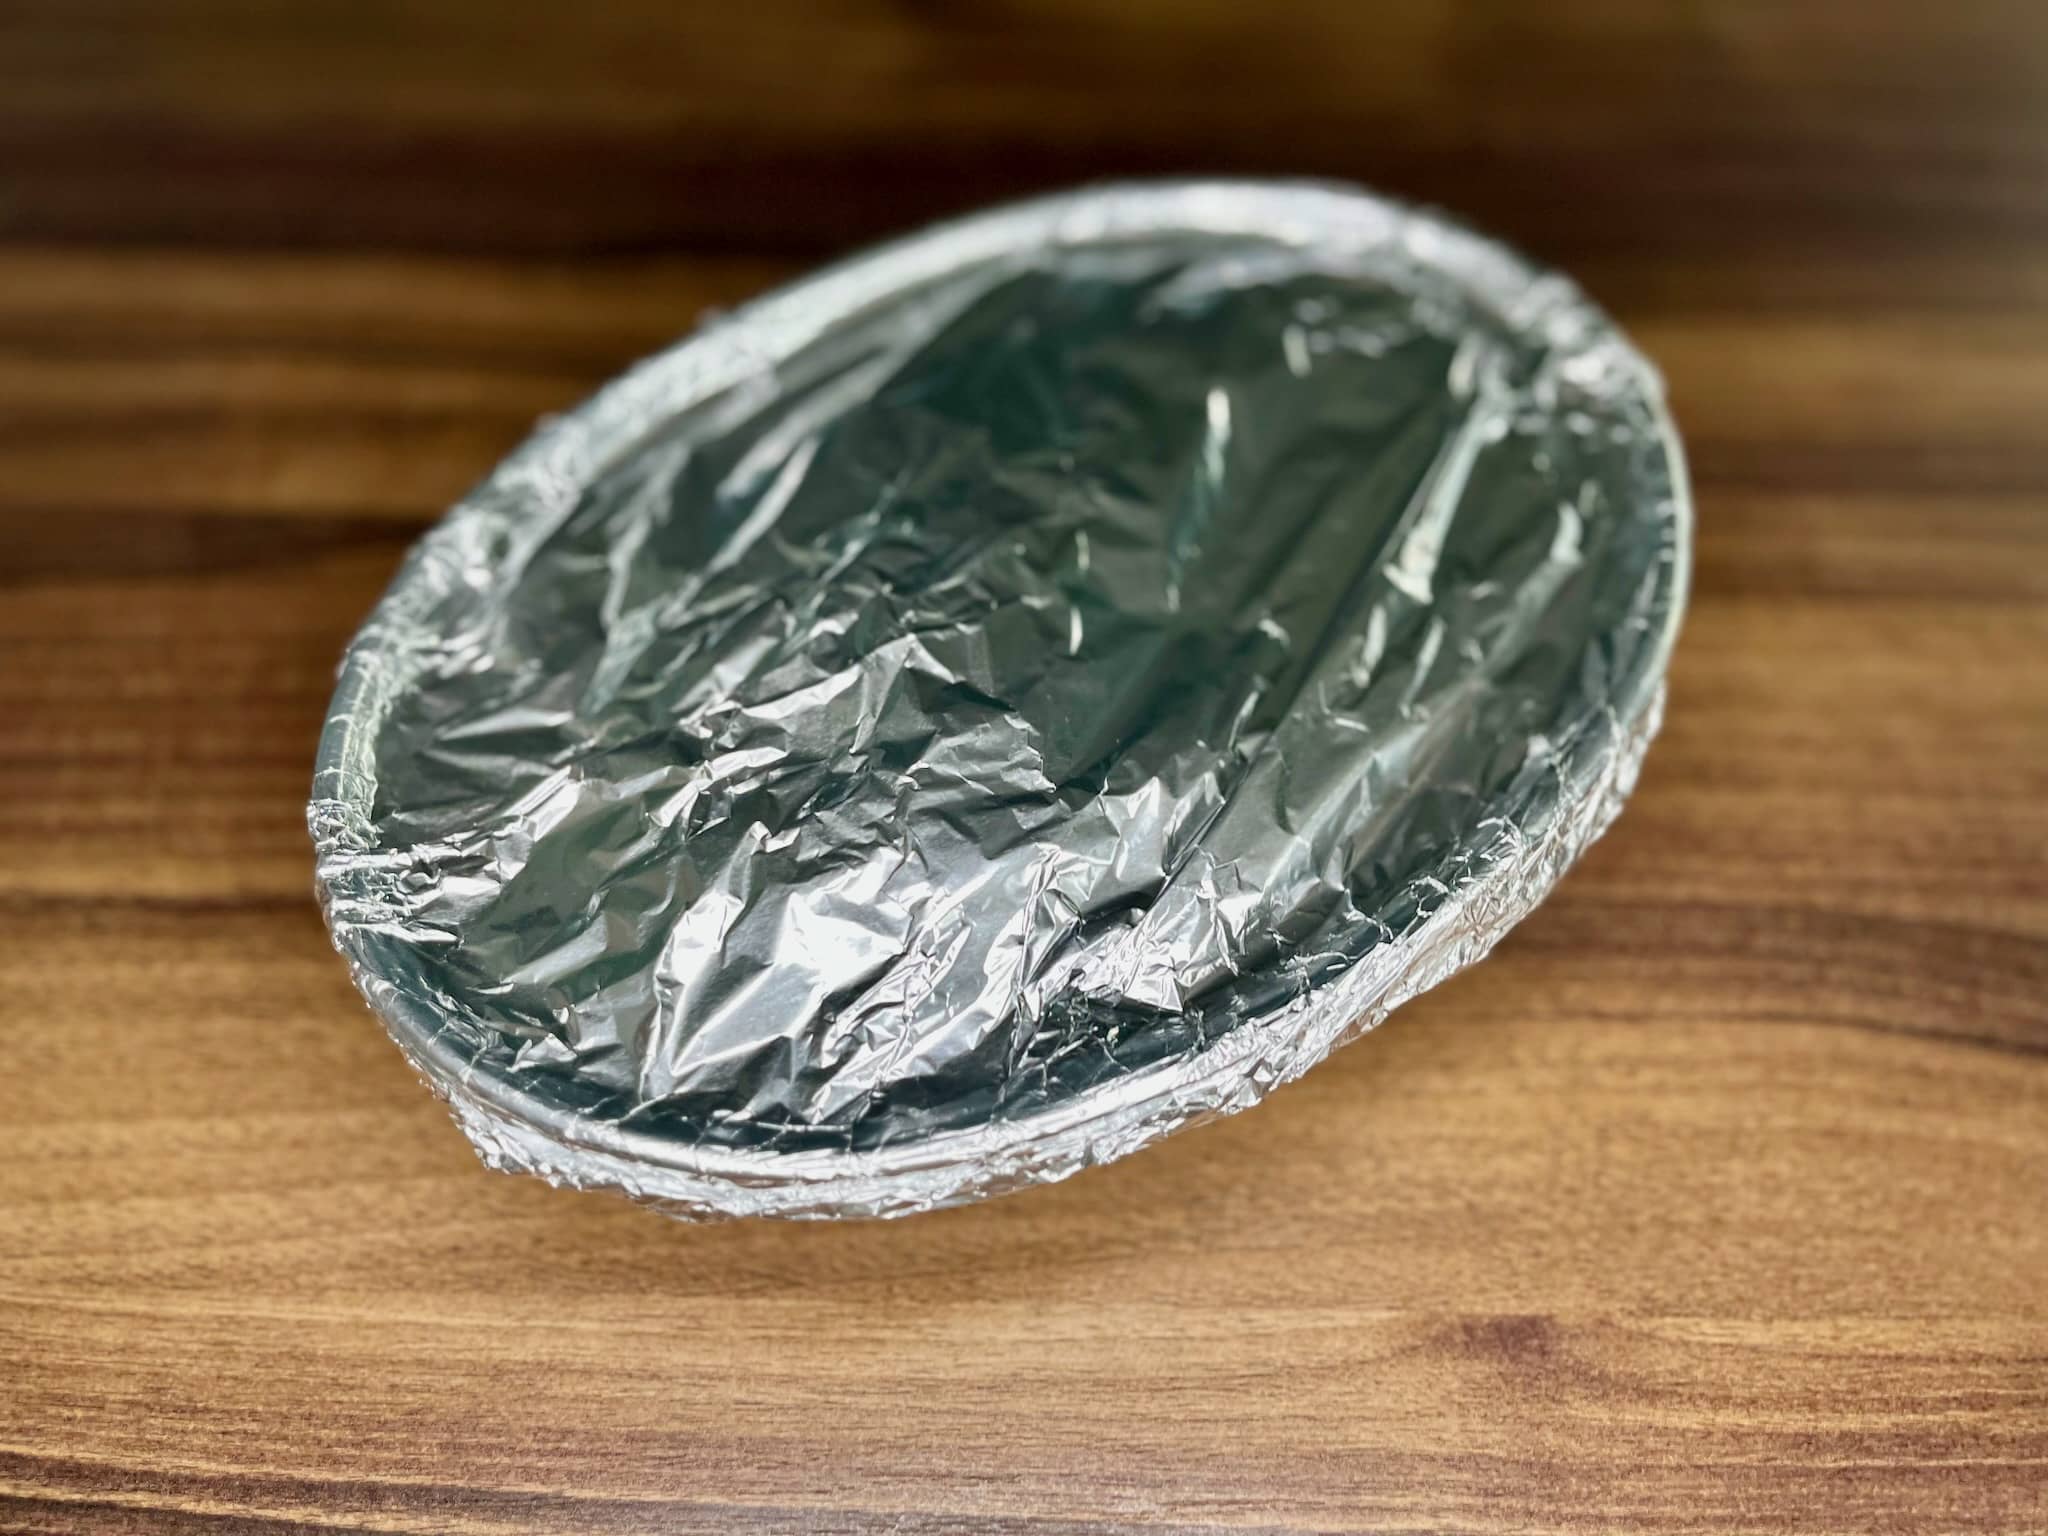 A disk for Cheesy Baked Potatoes covered with tin foil ready to put into the oven